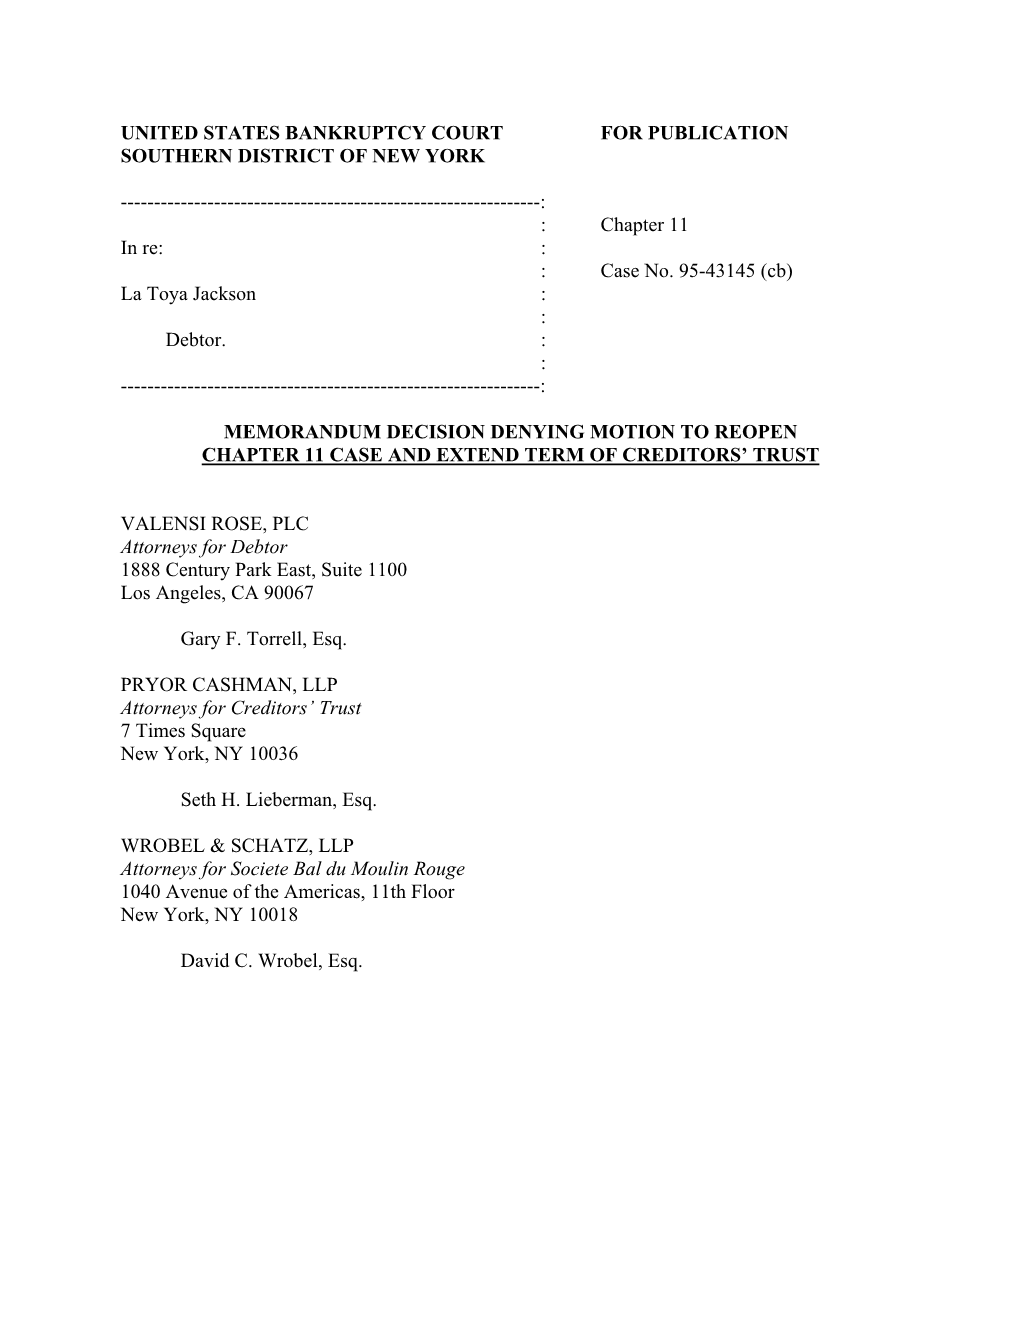 United States Bankruptcy Court for Publication Southern District of New York